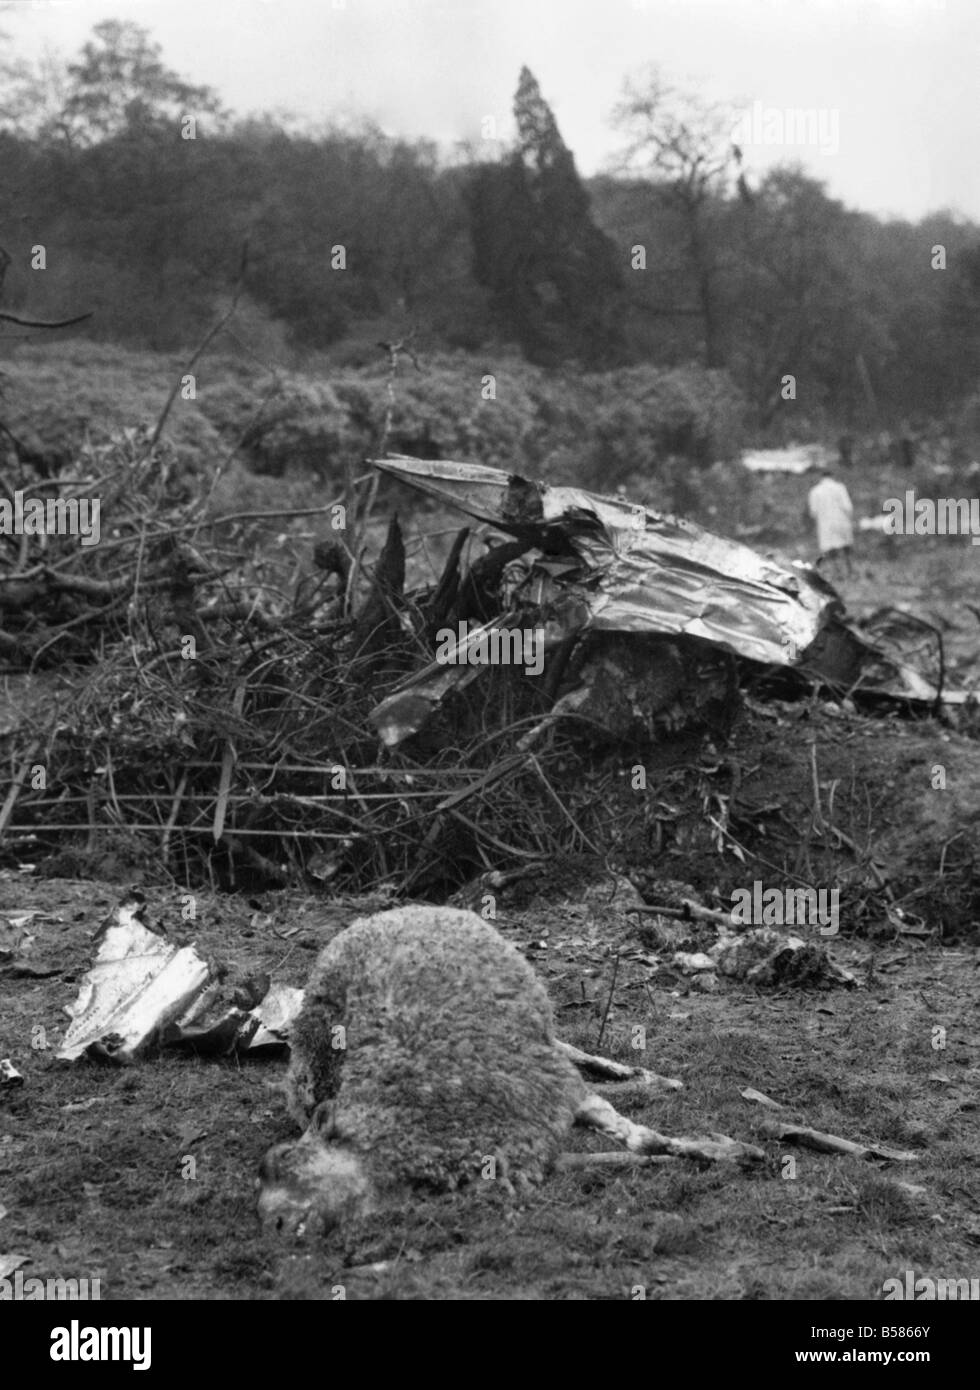 Scenes around the farmhouse which narrowly missed being completely demolished when the Caravelle jet crashed near the village of Fernhurst, Sussex. The aircraft ploughed a trough of devastation over about 400 yards across farmland and woods. Sheep lay slaughtered where the aircraft ploughed across a field which is charred from the burst kerosene fuel tanks. November 1967 P004331 Stock Photo